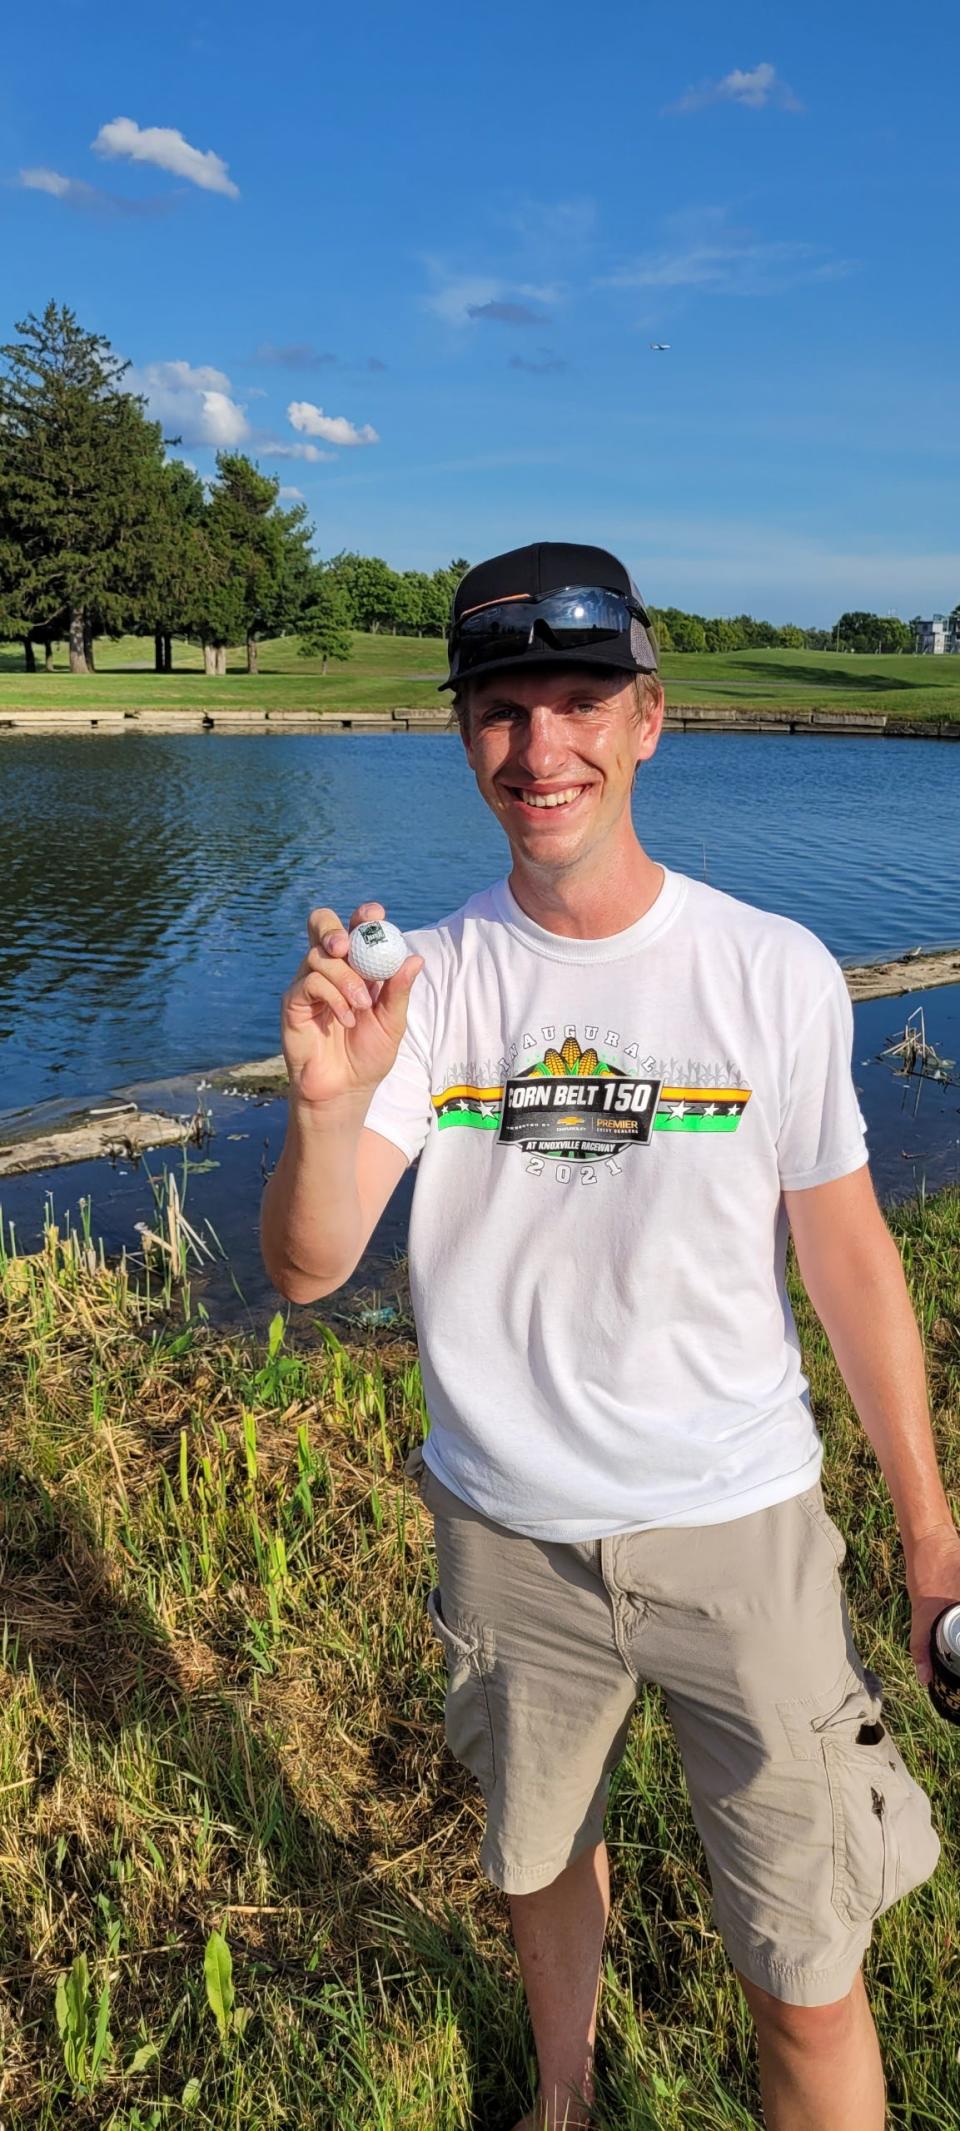 The infield of the Indianapolis Motor Speedway has four holes of a golf course designed by legendary golf course architect Pete Dye. Jason Strickland and I found golf balls in a water hazard during a trip to the speedway in 2021.